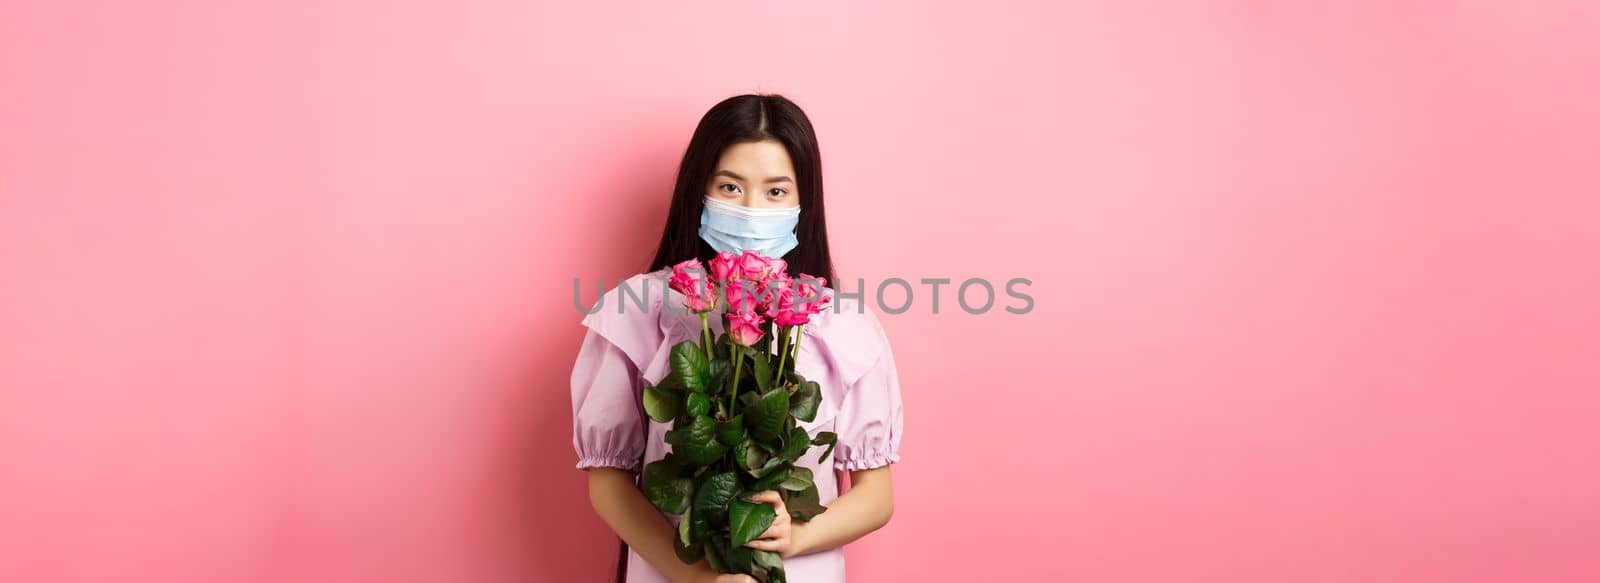 Young asian girl in medical mask holding flowers on Valentines day, receive bouquet of roses from lover, standing on pink background. Social distancing and covid-19 concept.